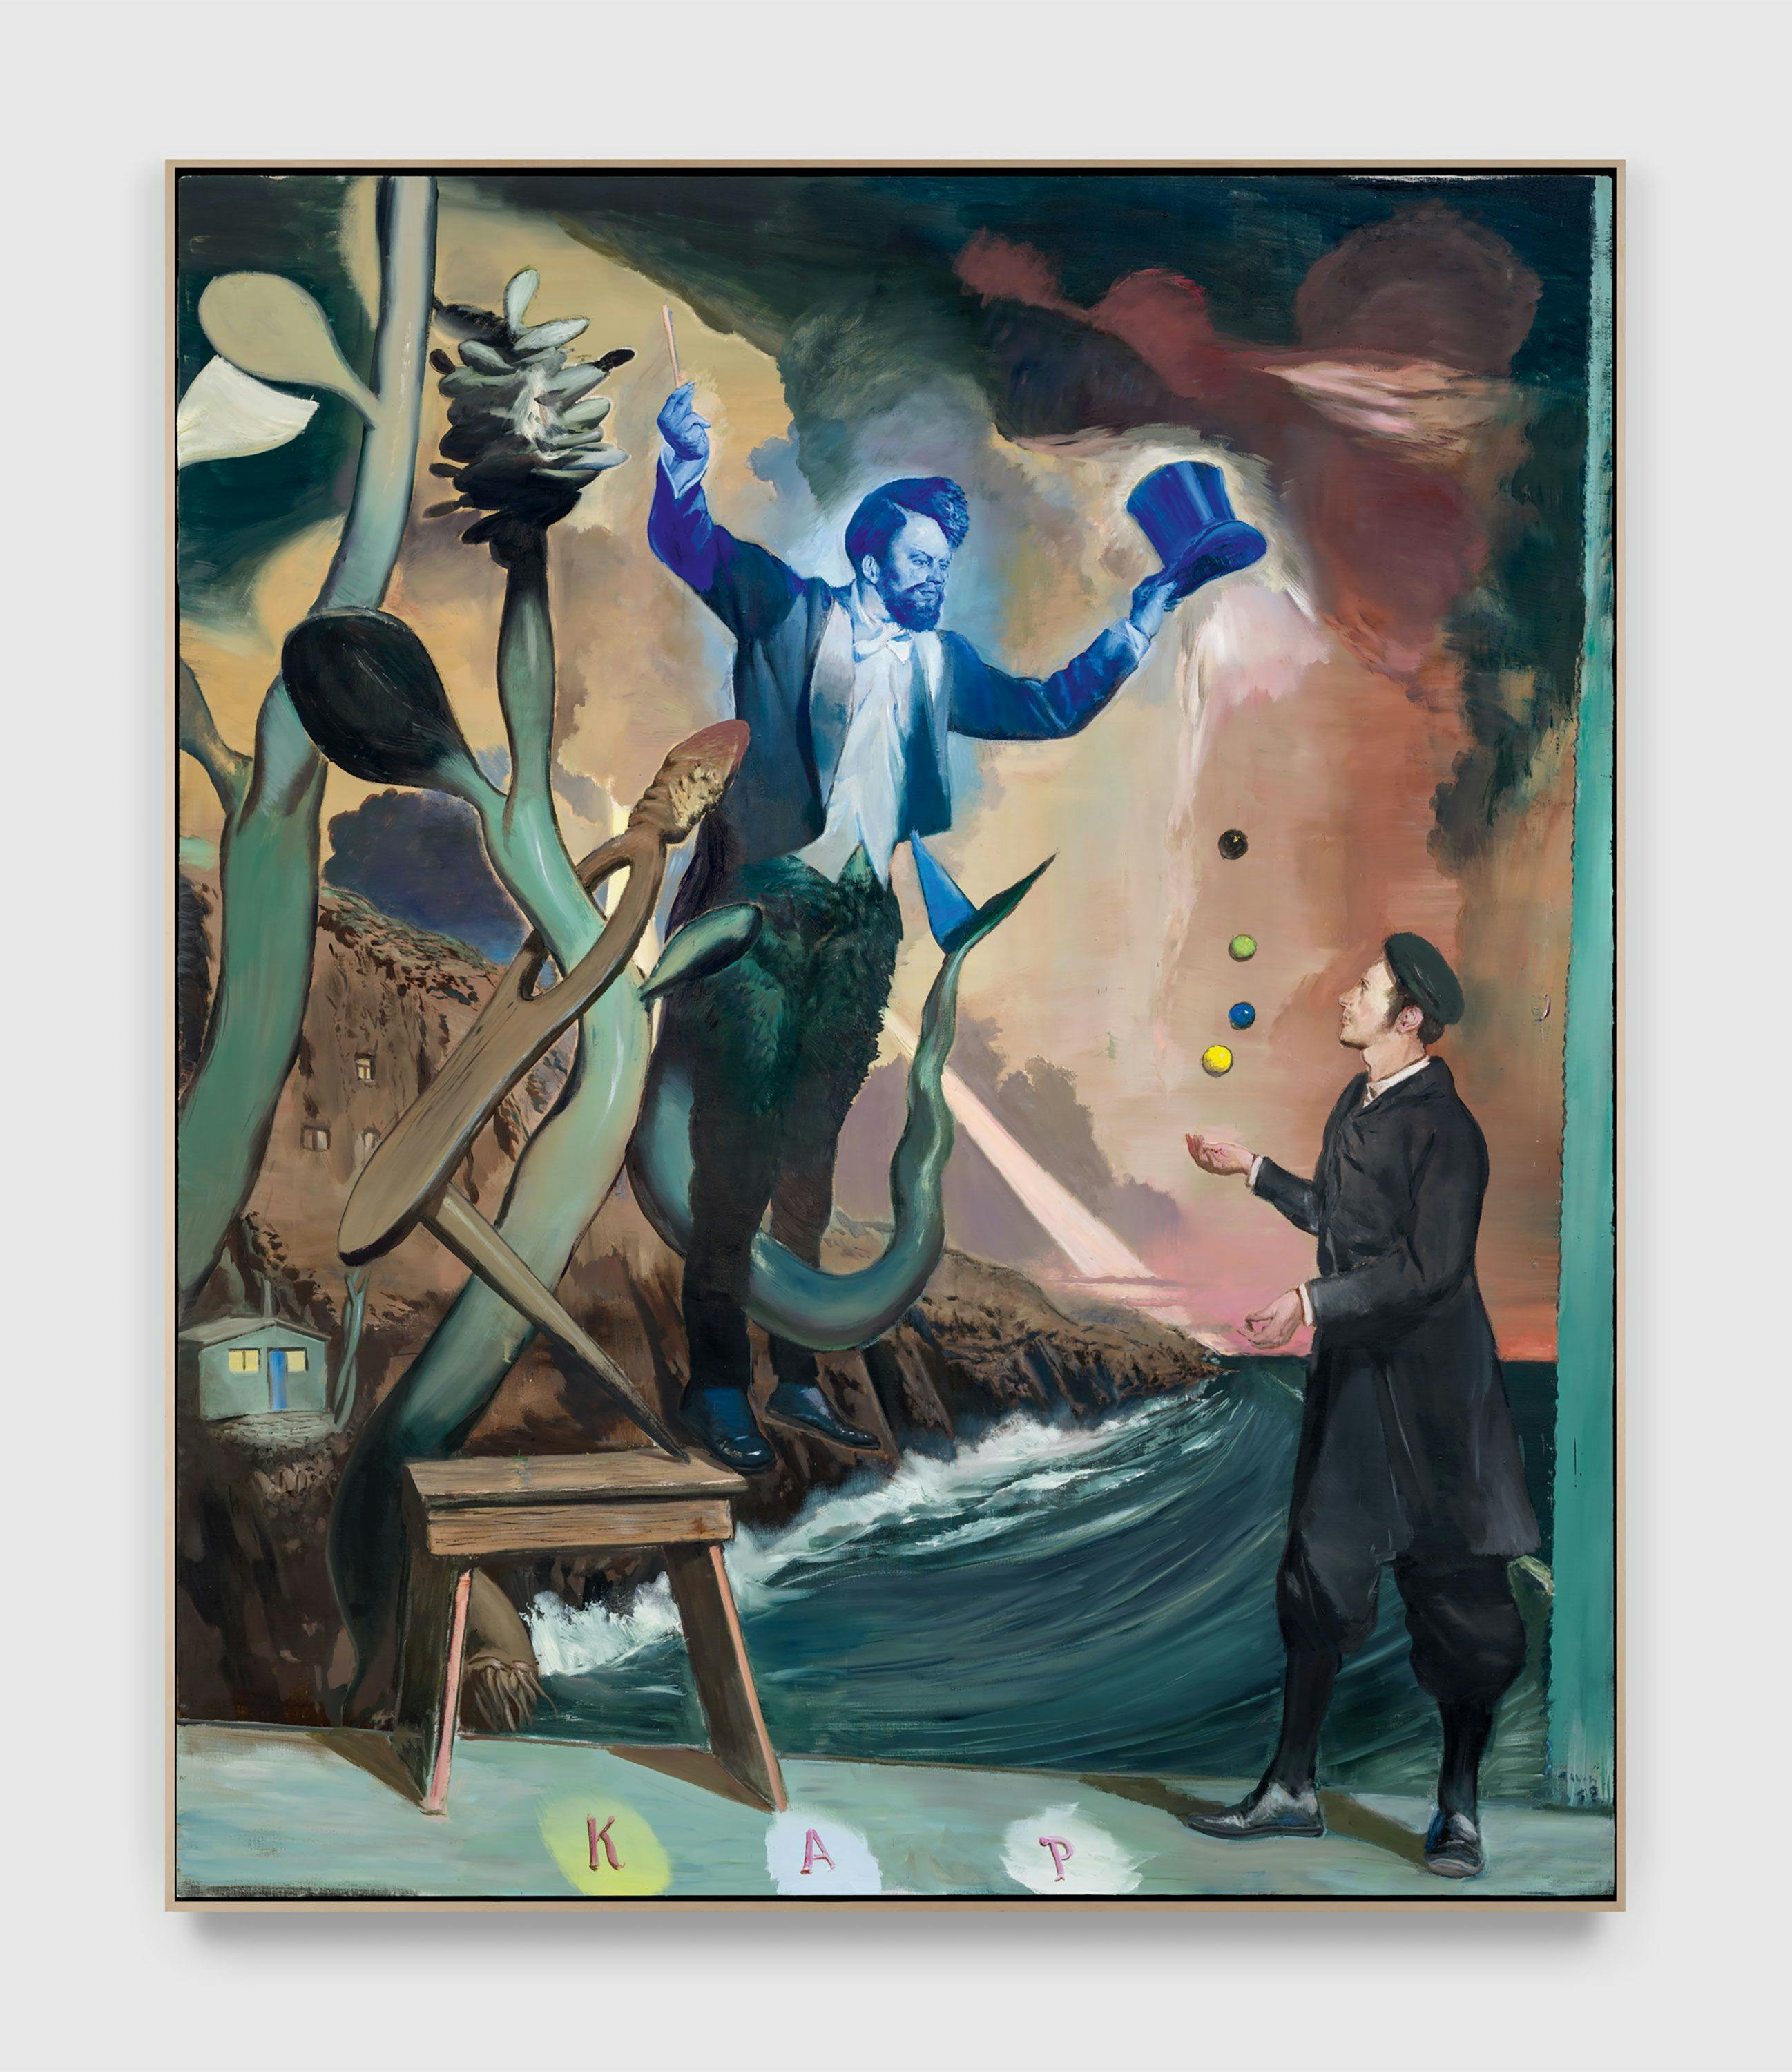 A painting by Neo Rauch, titled Kap, dated 2018.